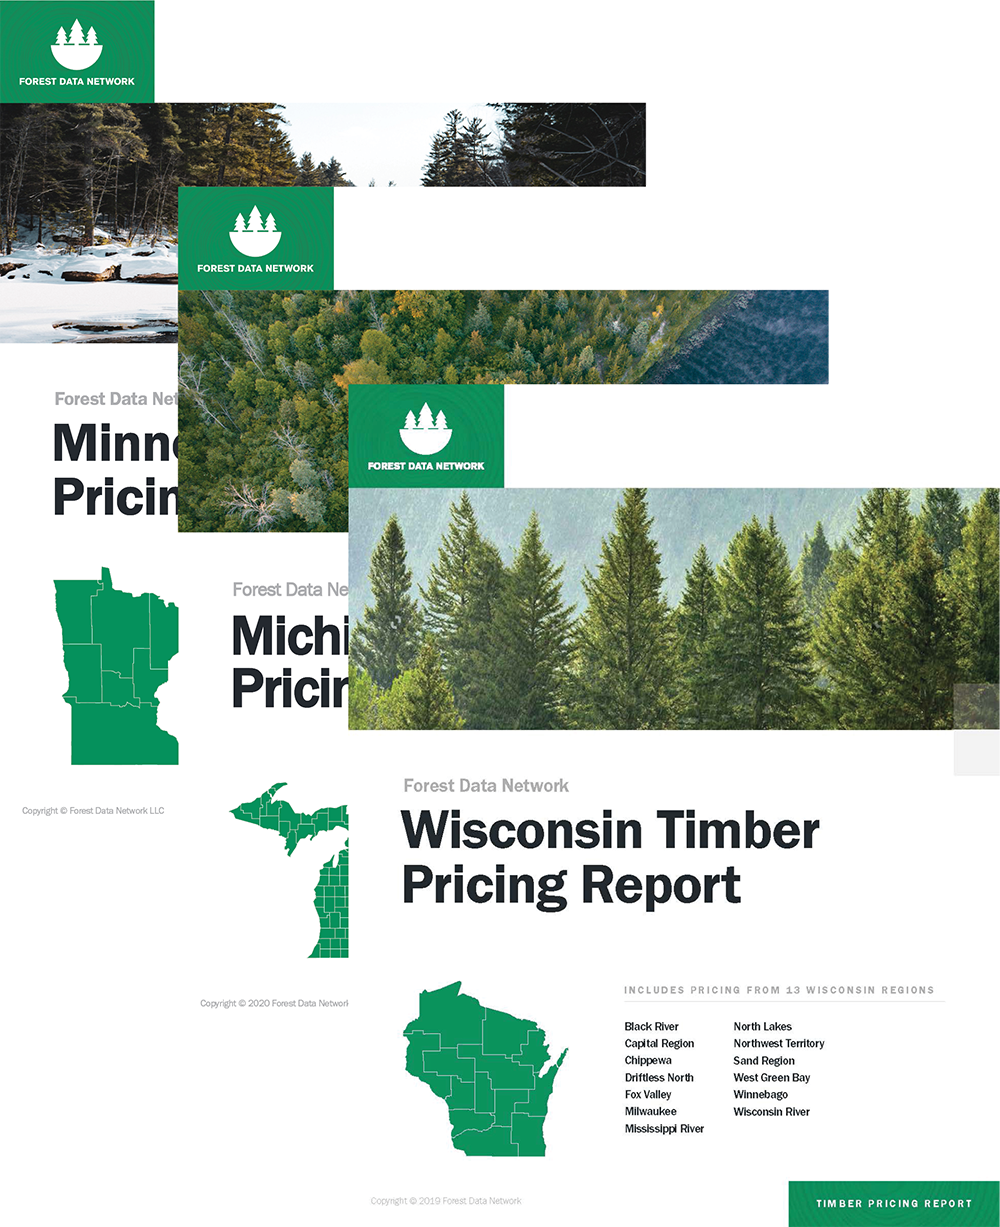 Timber Pricing Reports